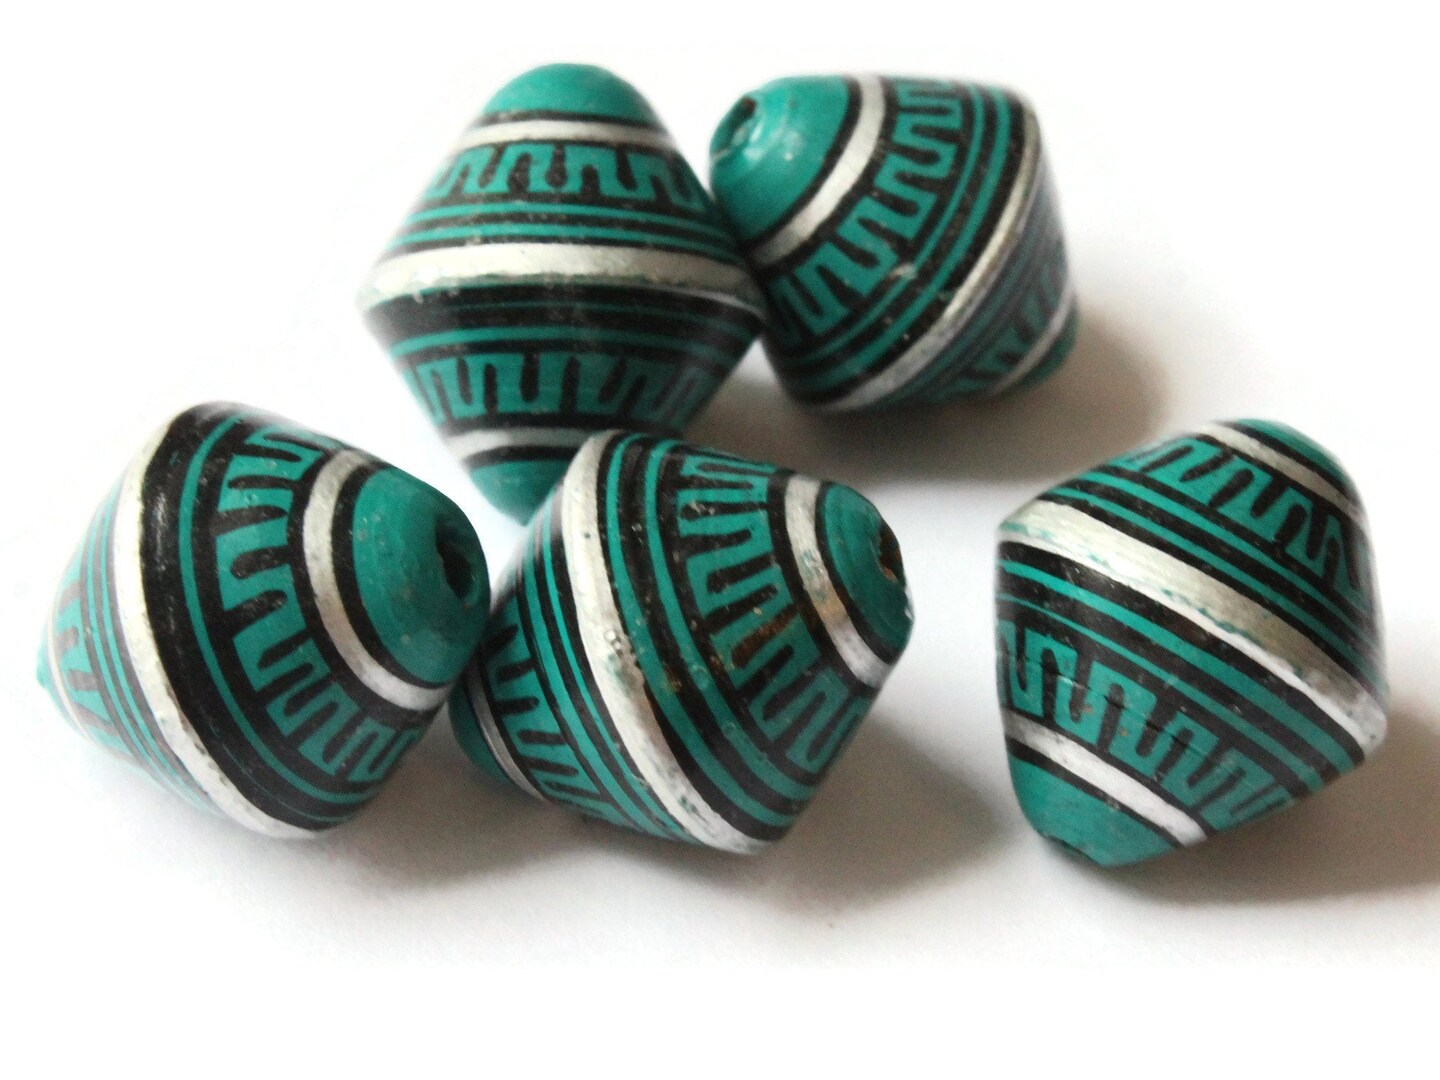 5 21mm Vintage Painted Peruvian Clay Beads - Teal Green Silver and Black Patterned Bicone Beads